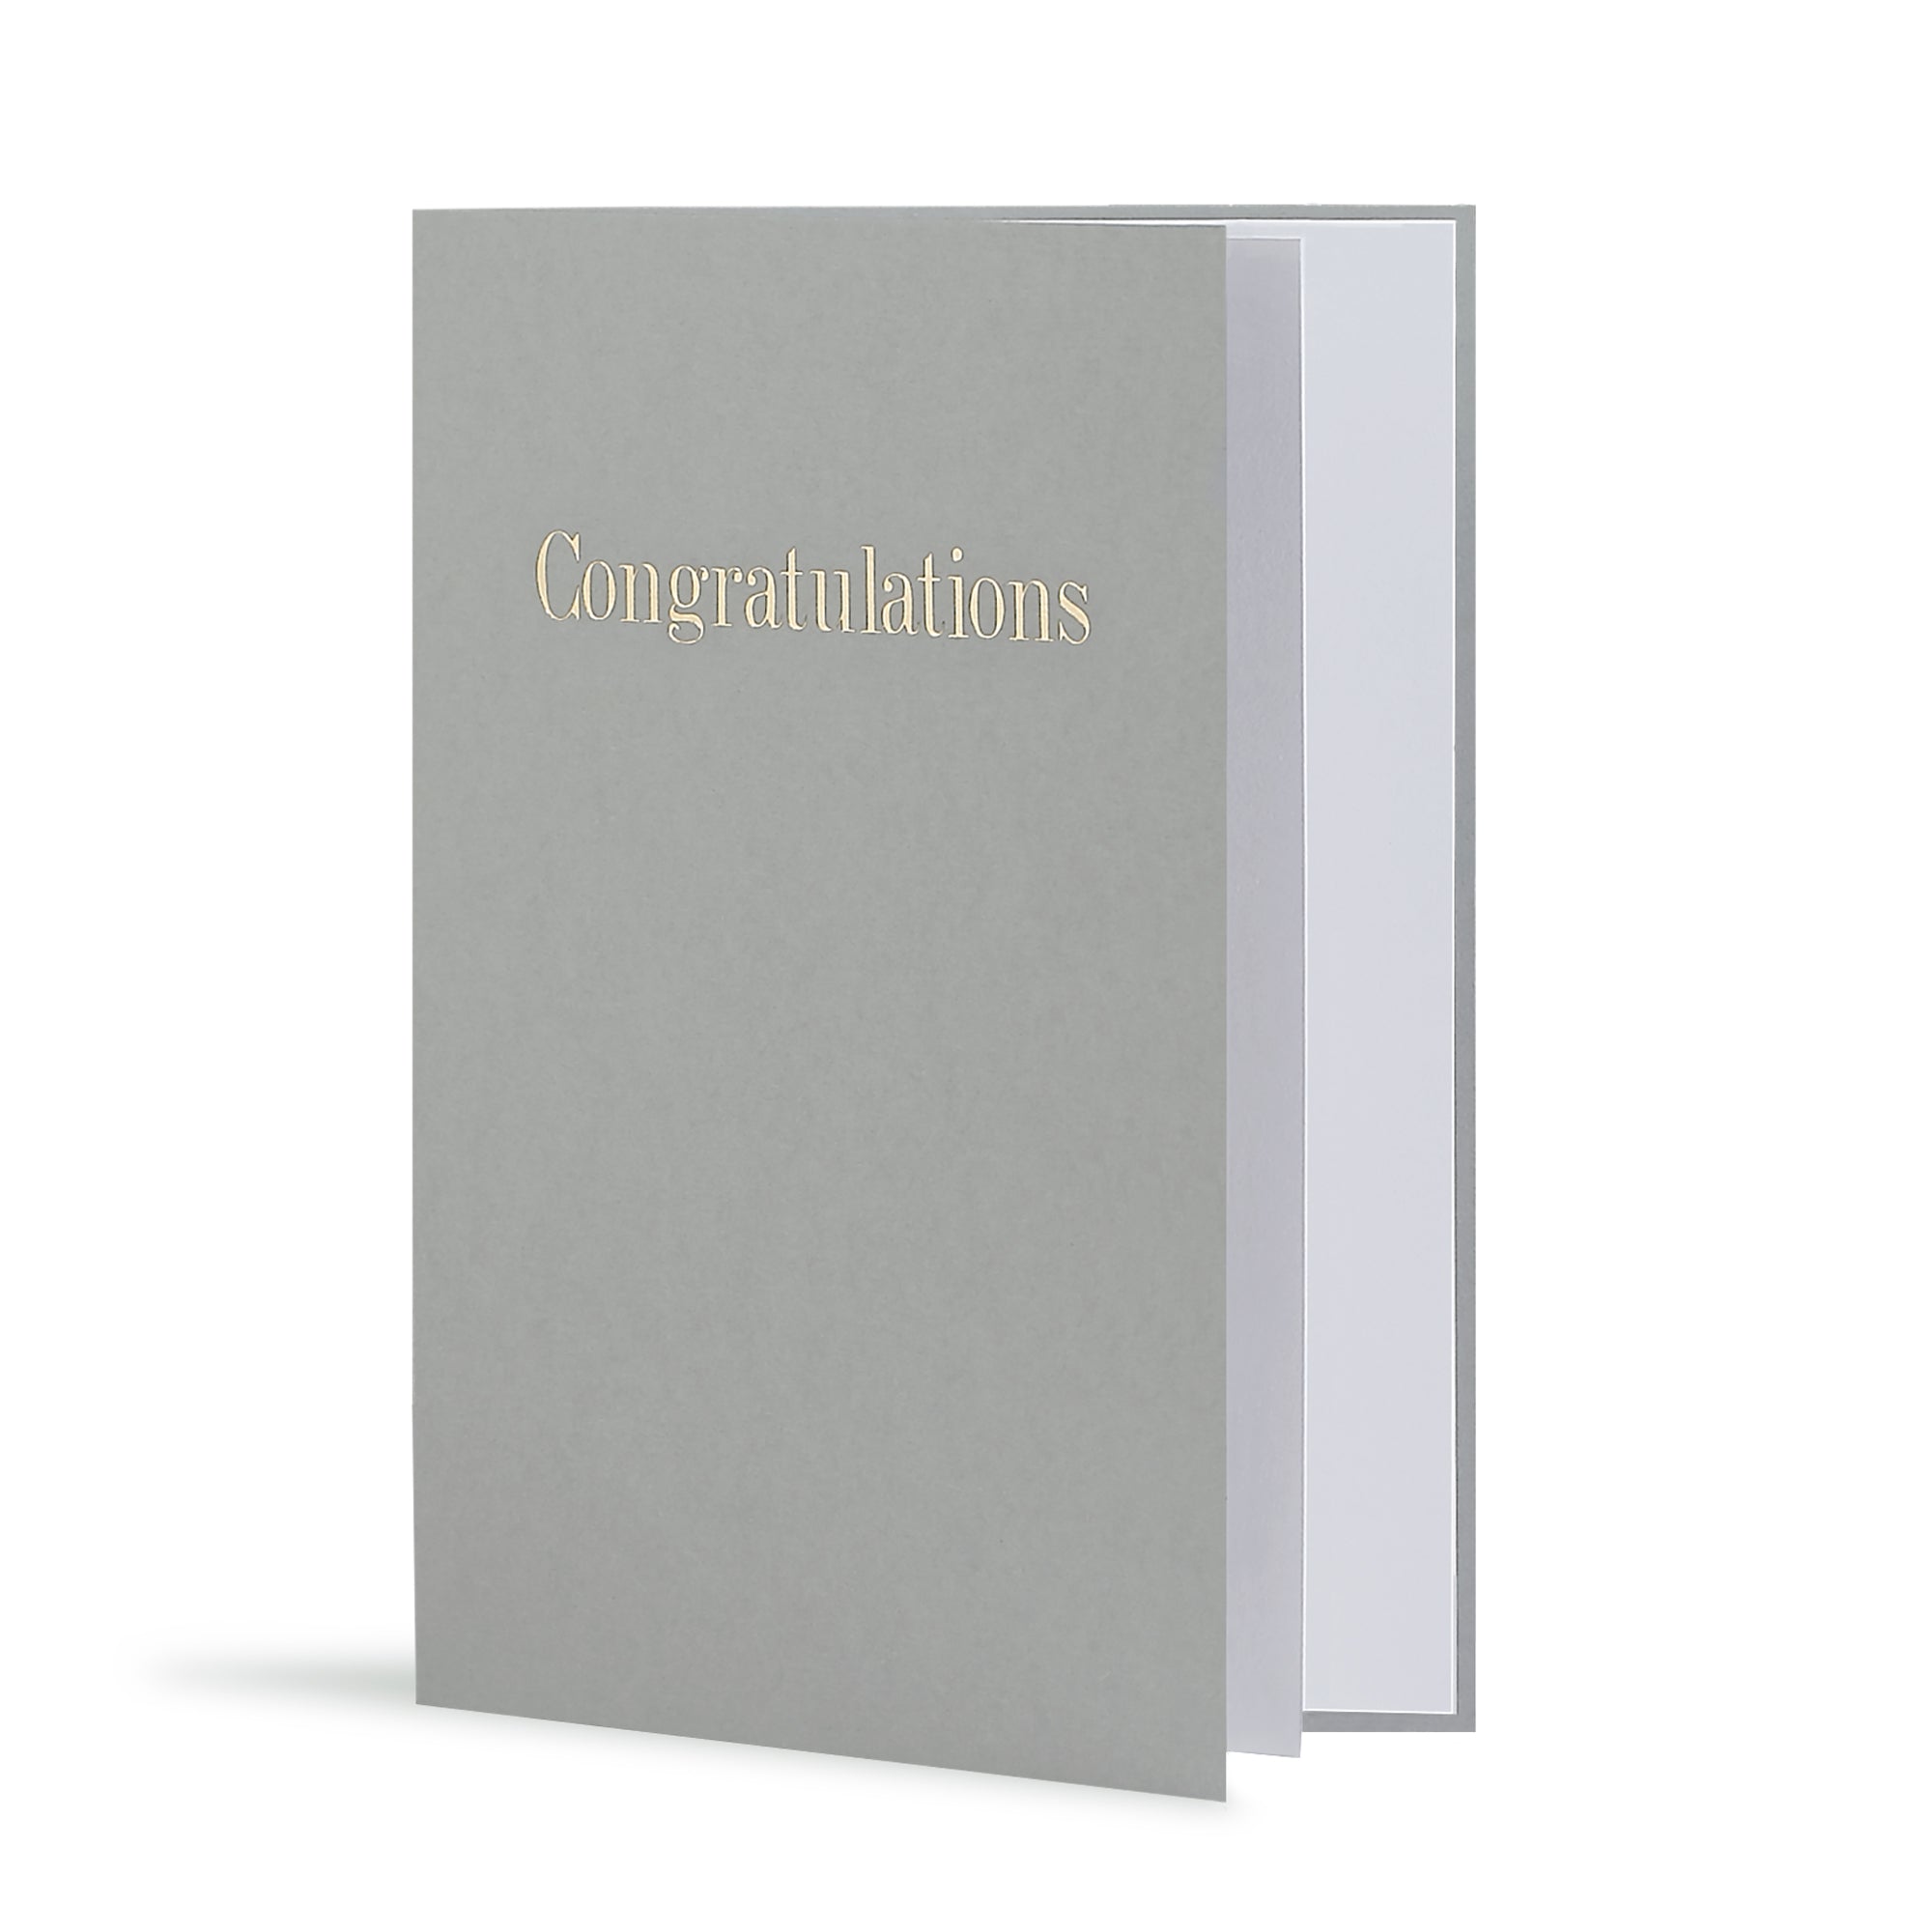 Congratulations Greeting Card in Grey, Side